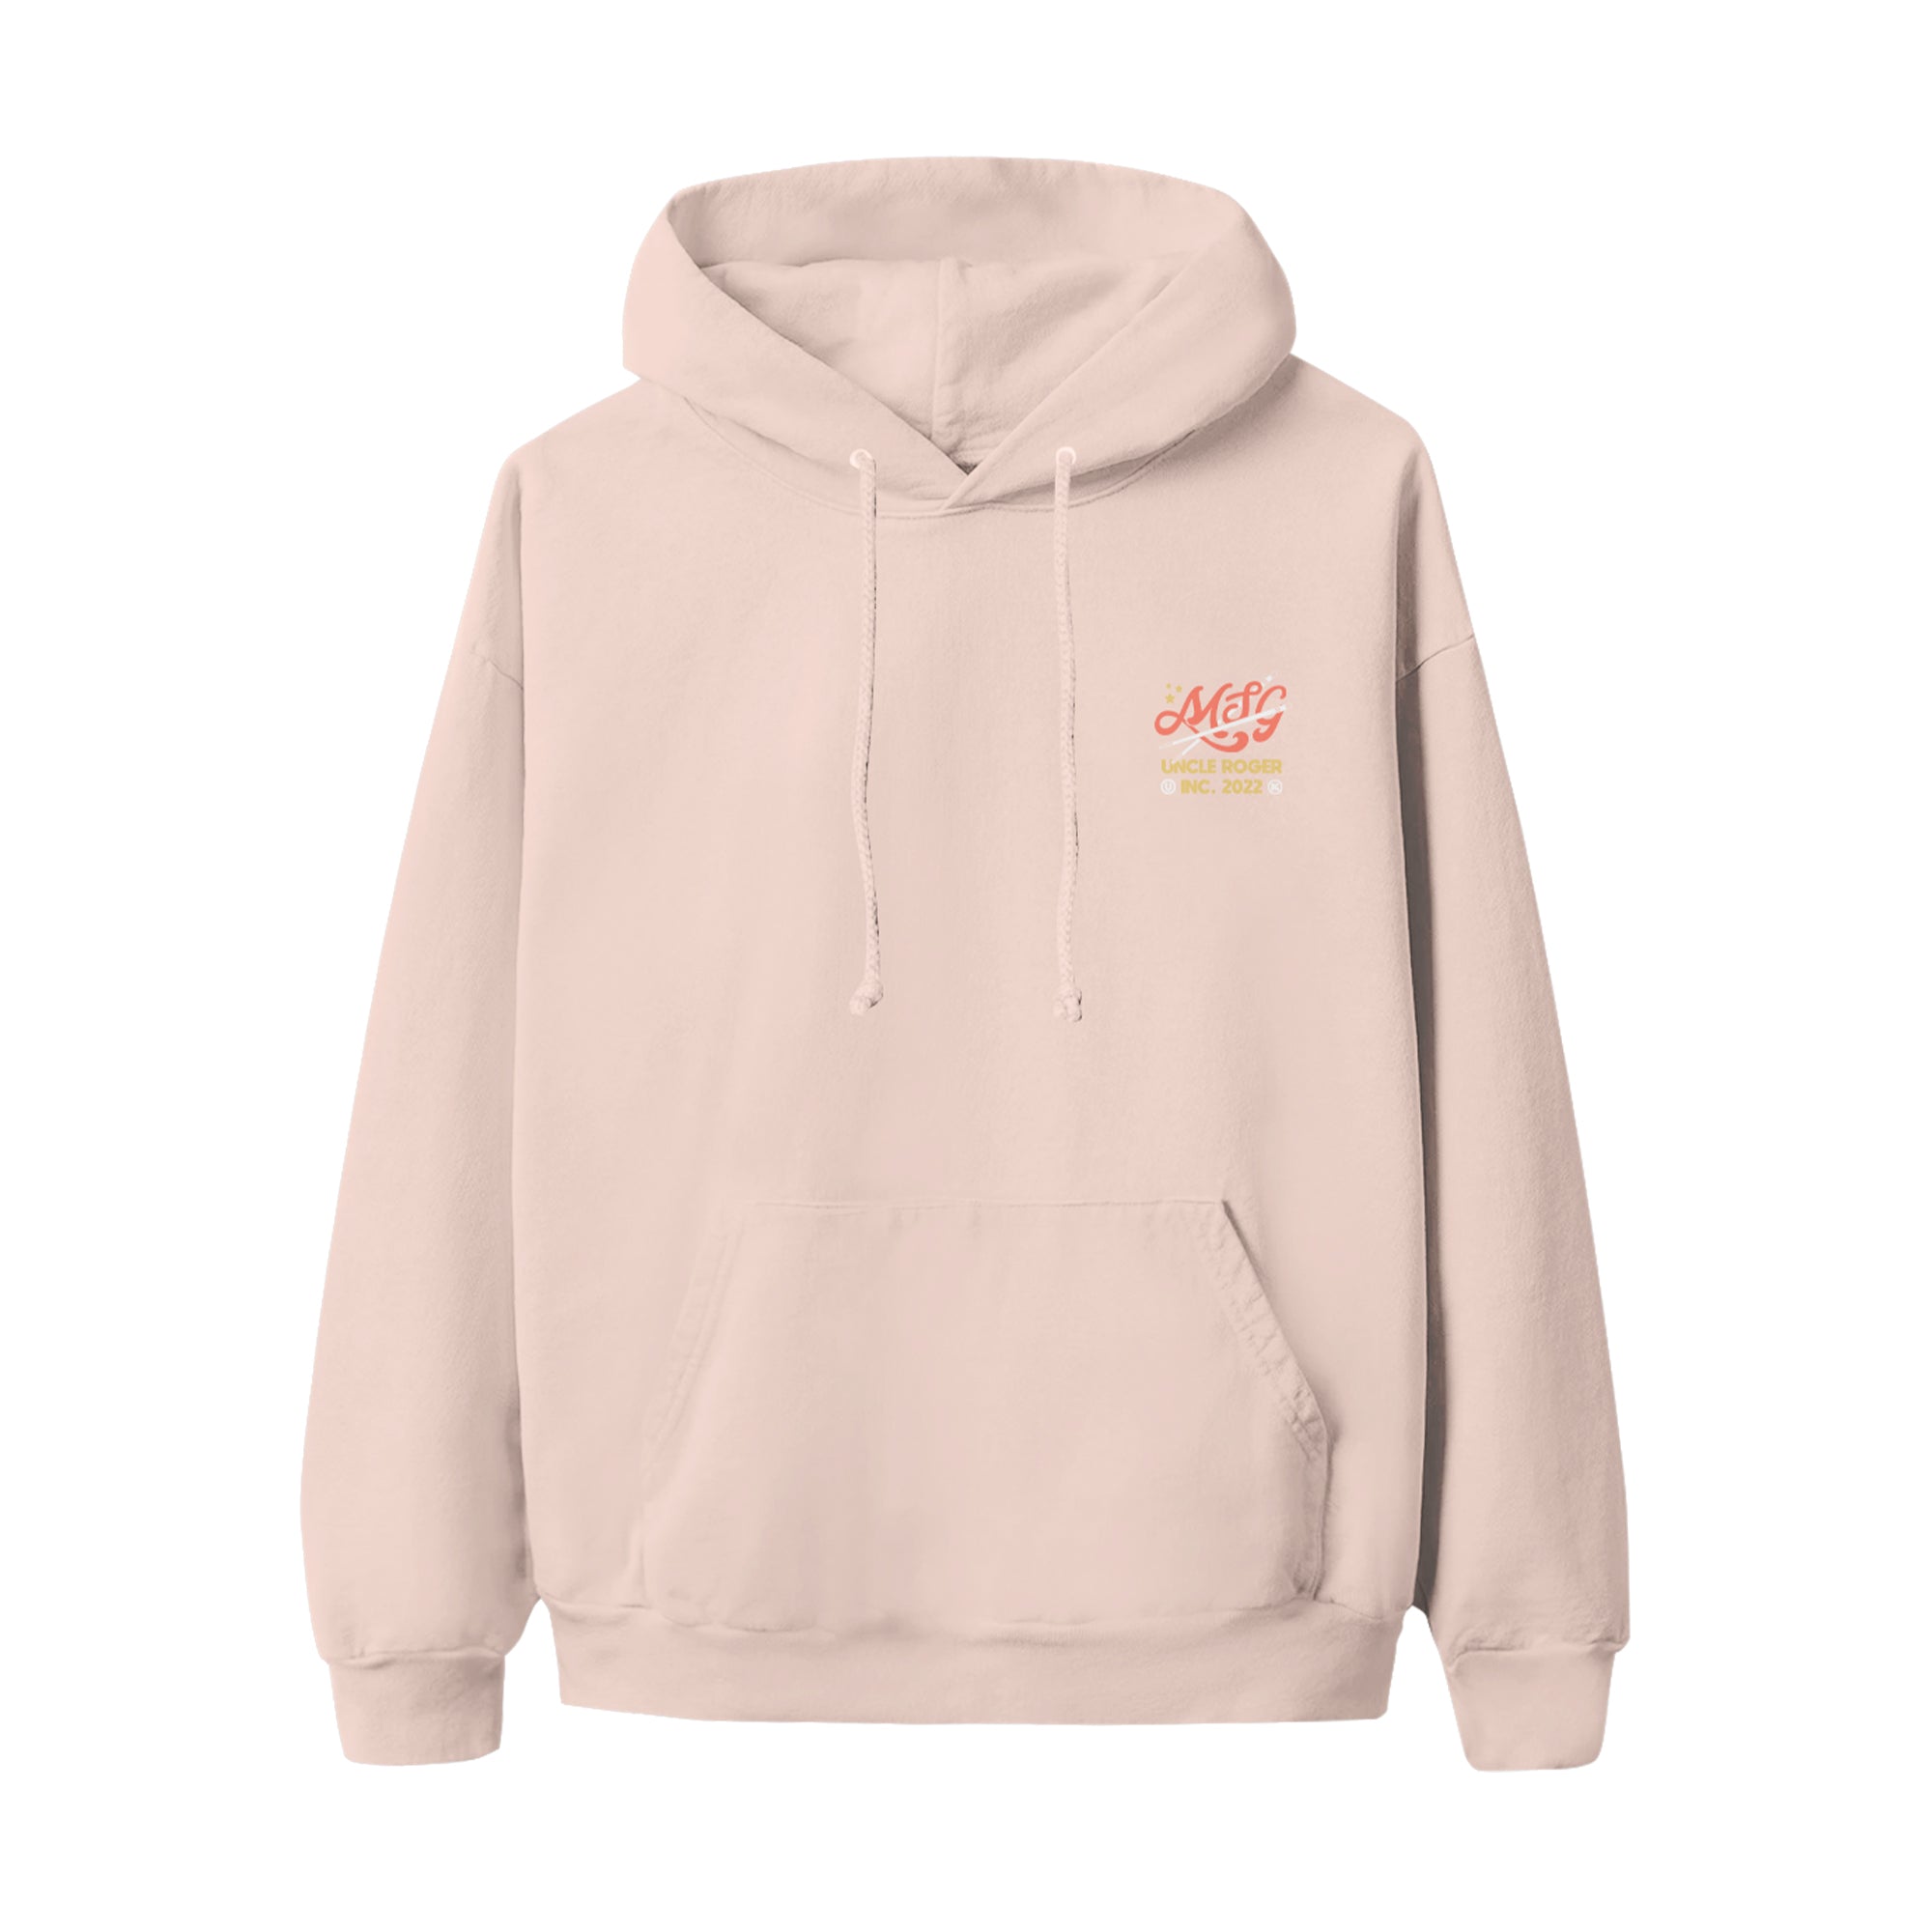 MSG Pale Pink Hoodie. Front